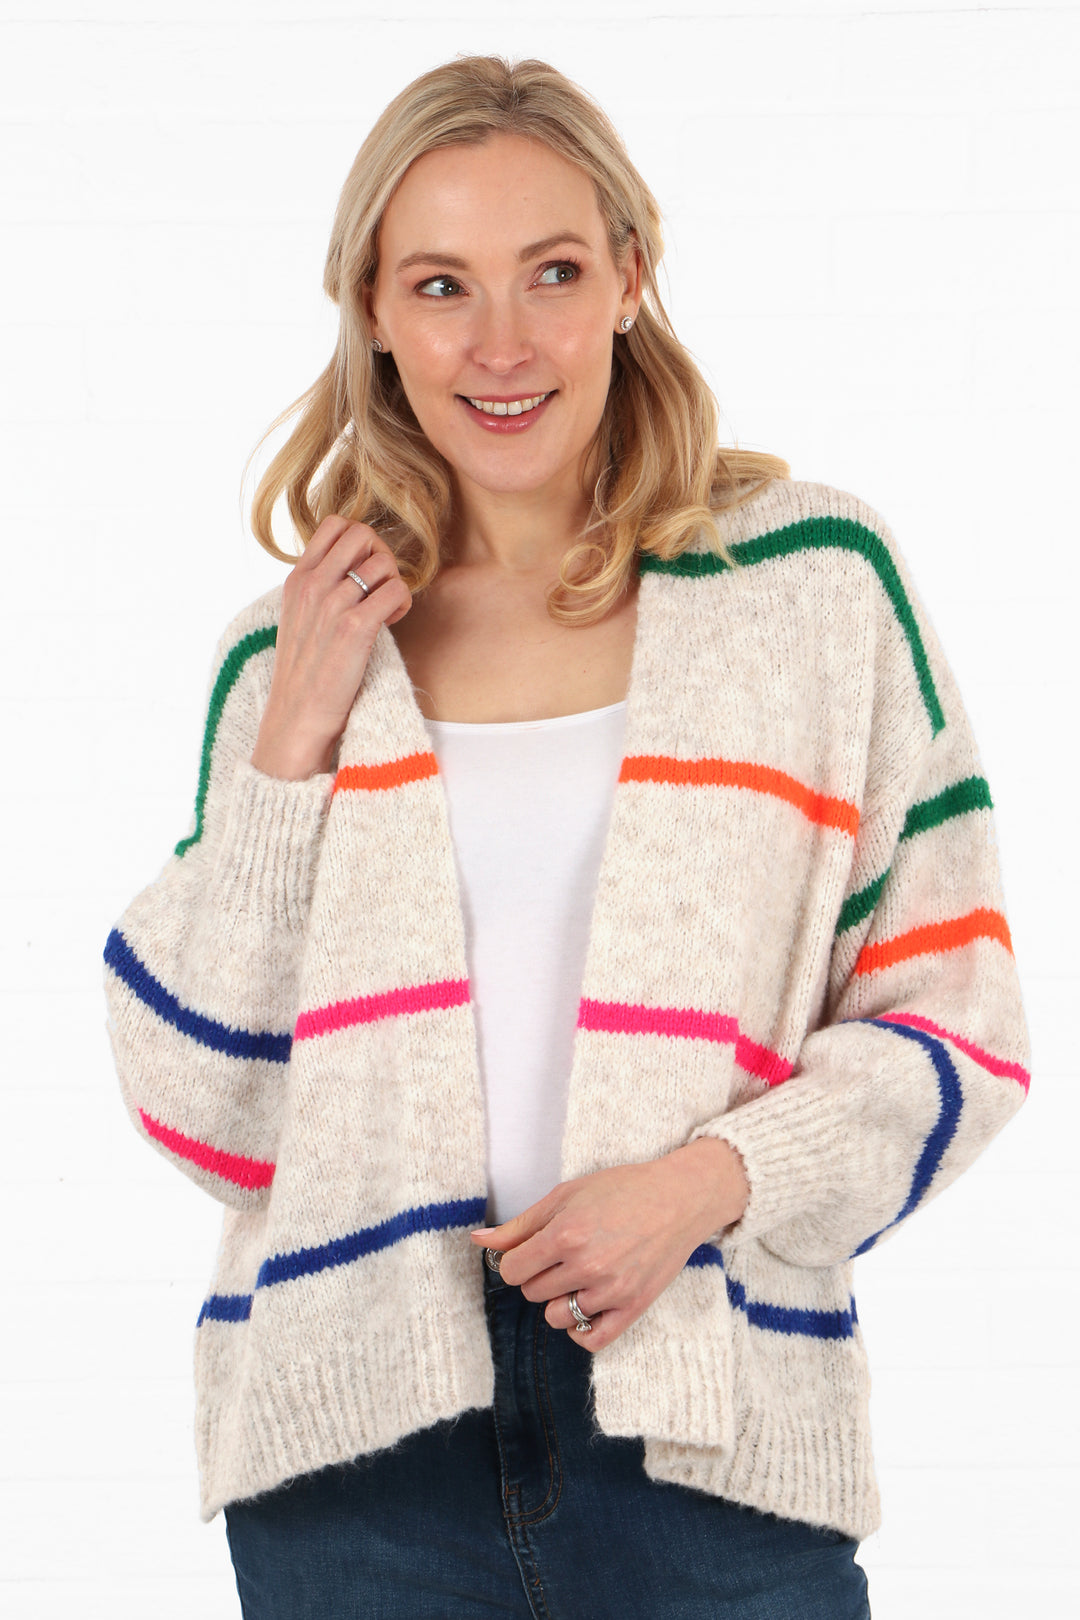 cream knitted cardigan with horizontal stripes in green, orange, pink and blue